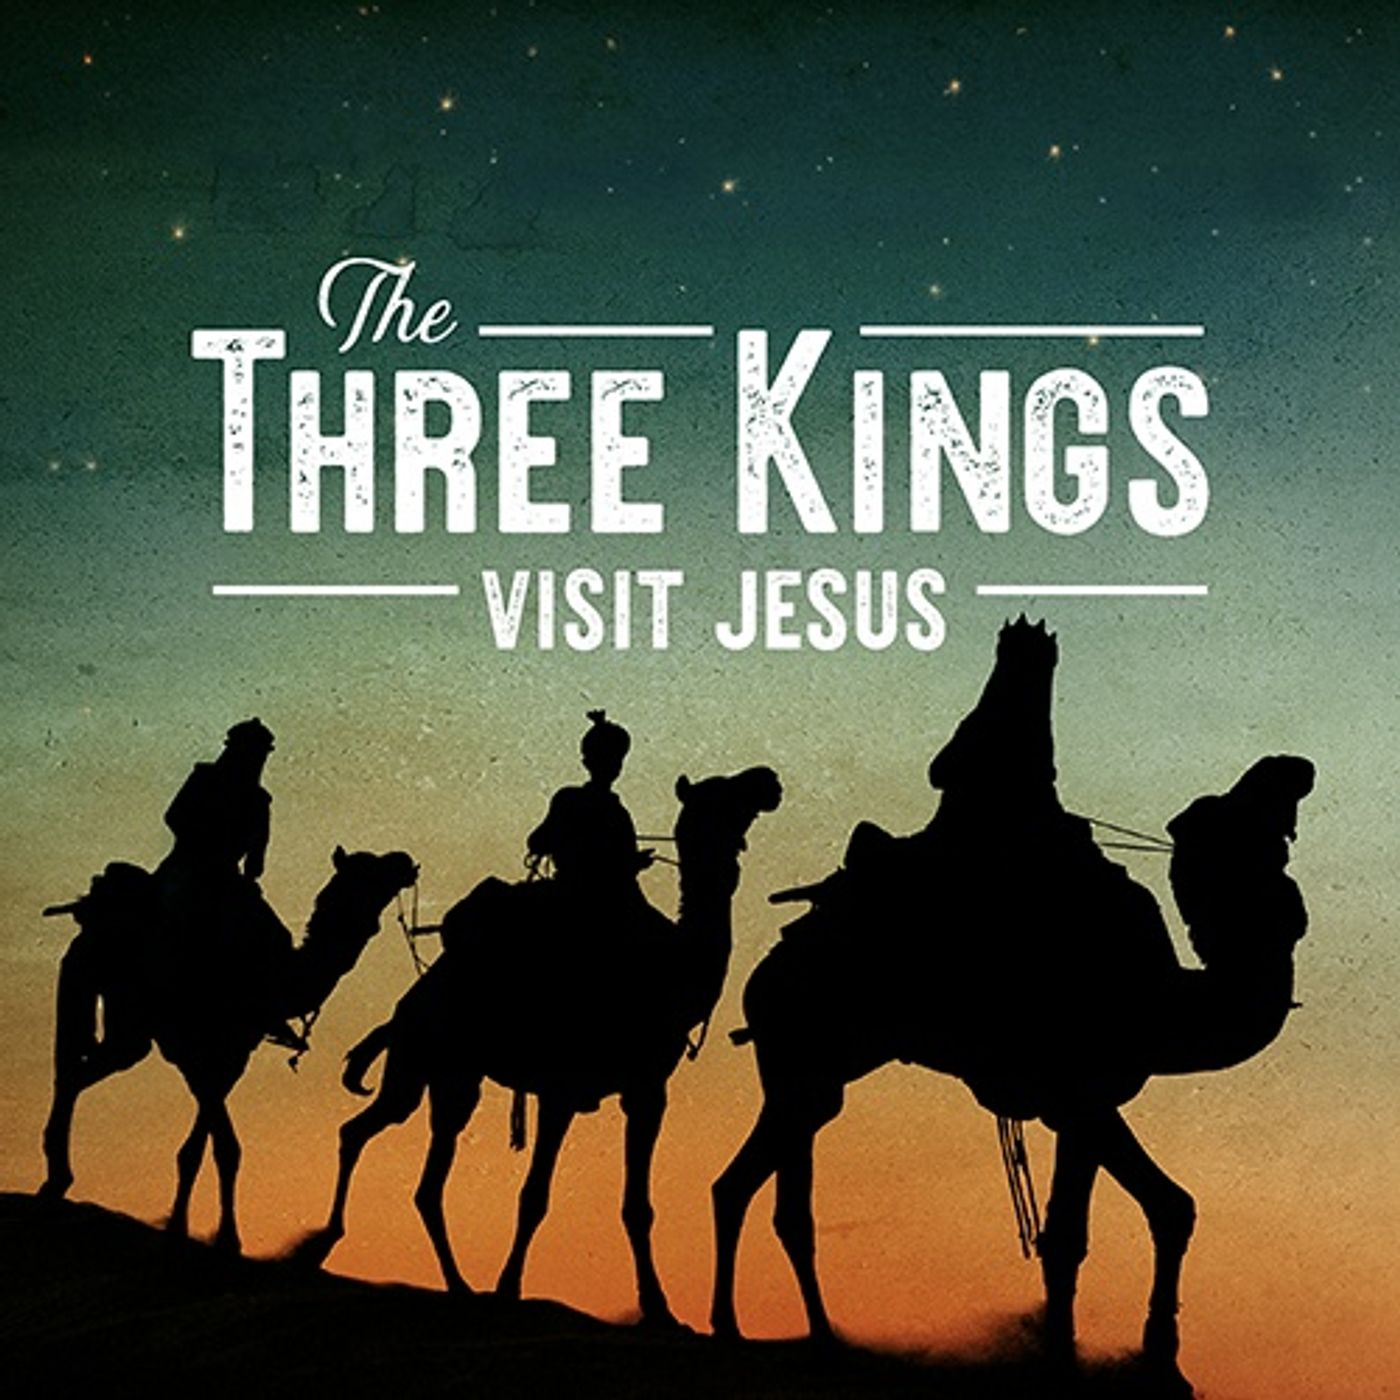 The Bedtime Story of the 3 Wisemen